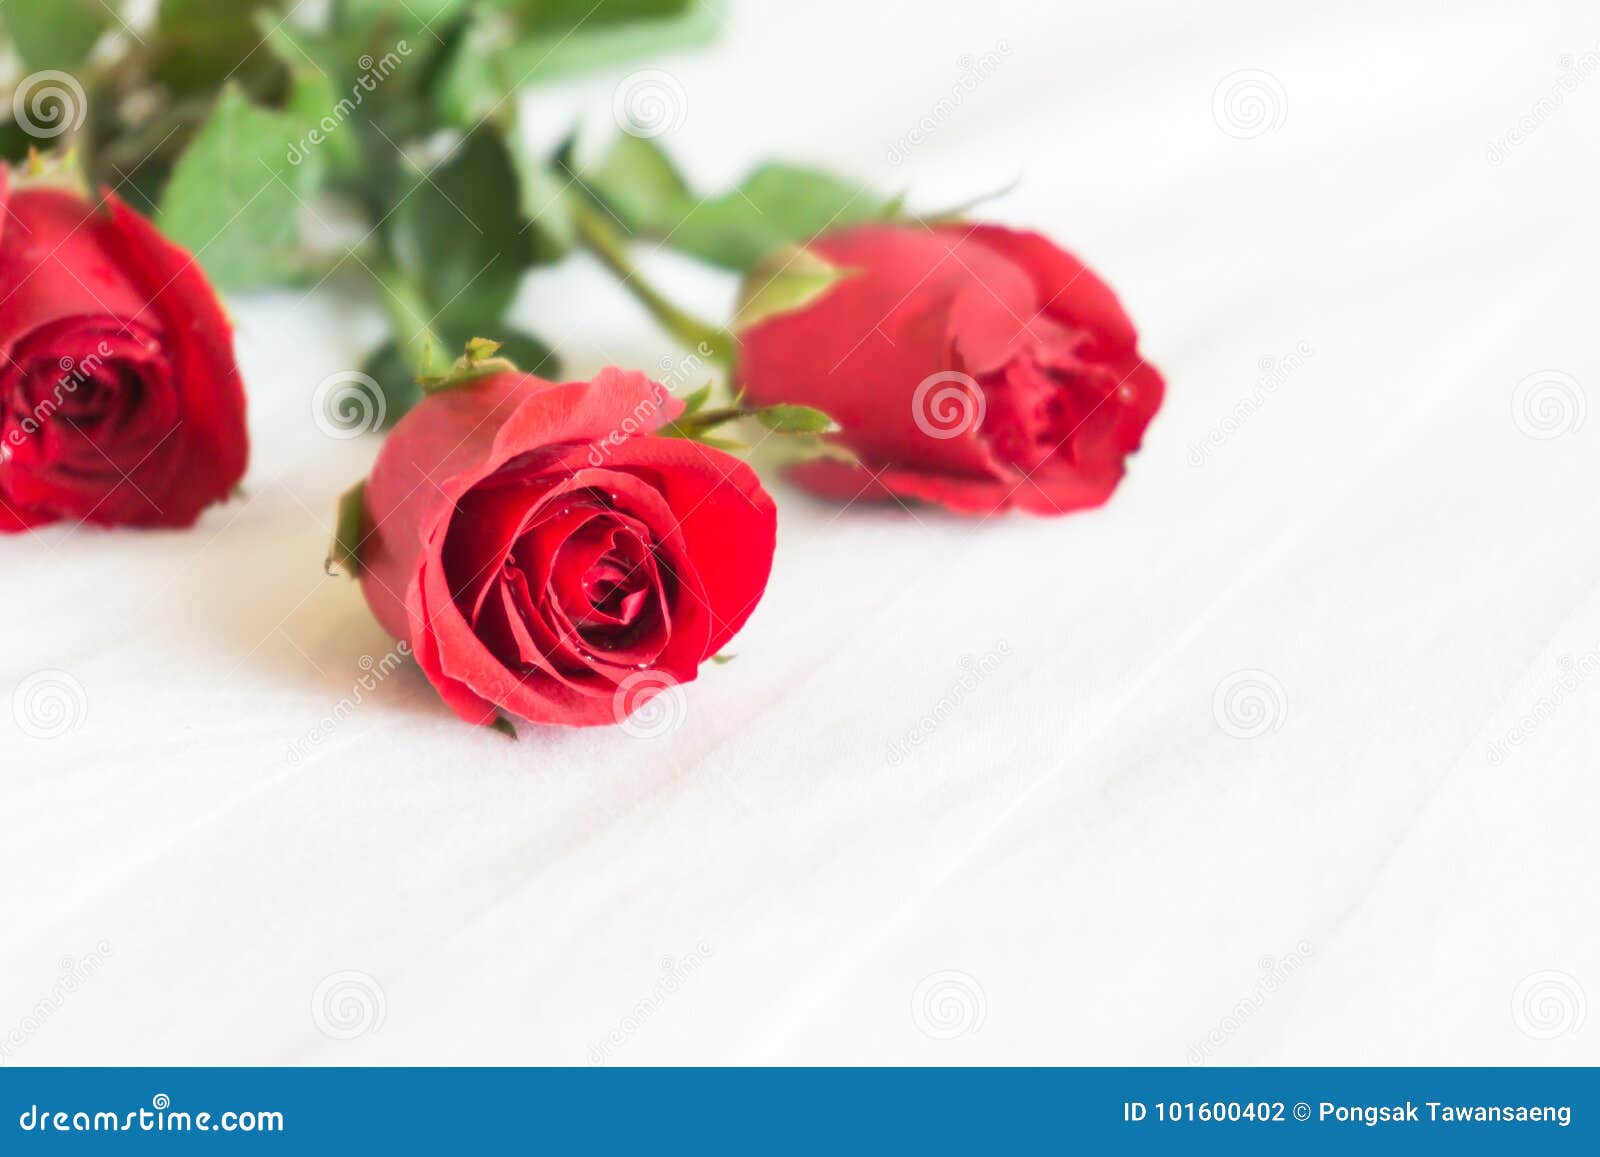 Closeup Red Rose On White Bed Background, Love And Romantic Feel Stock ...